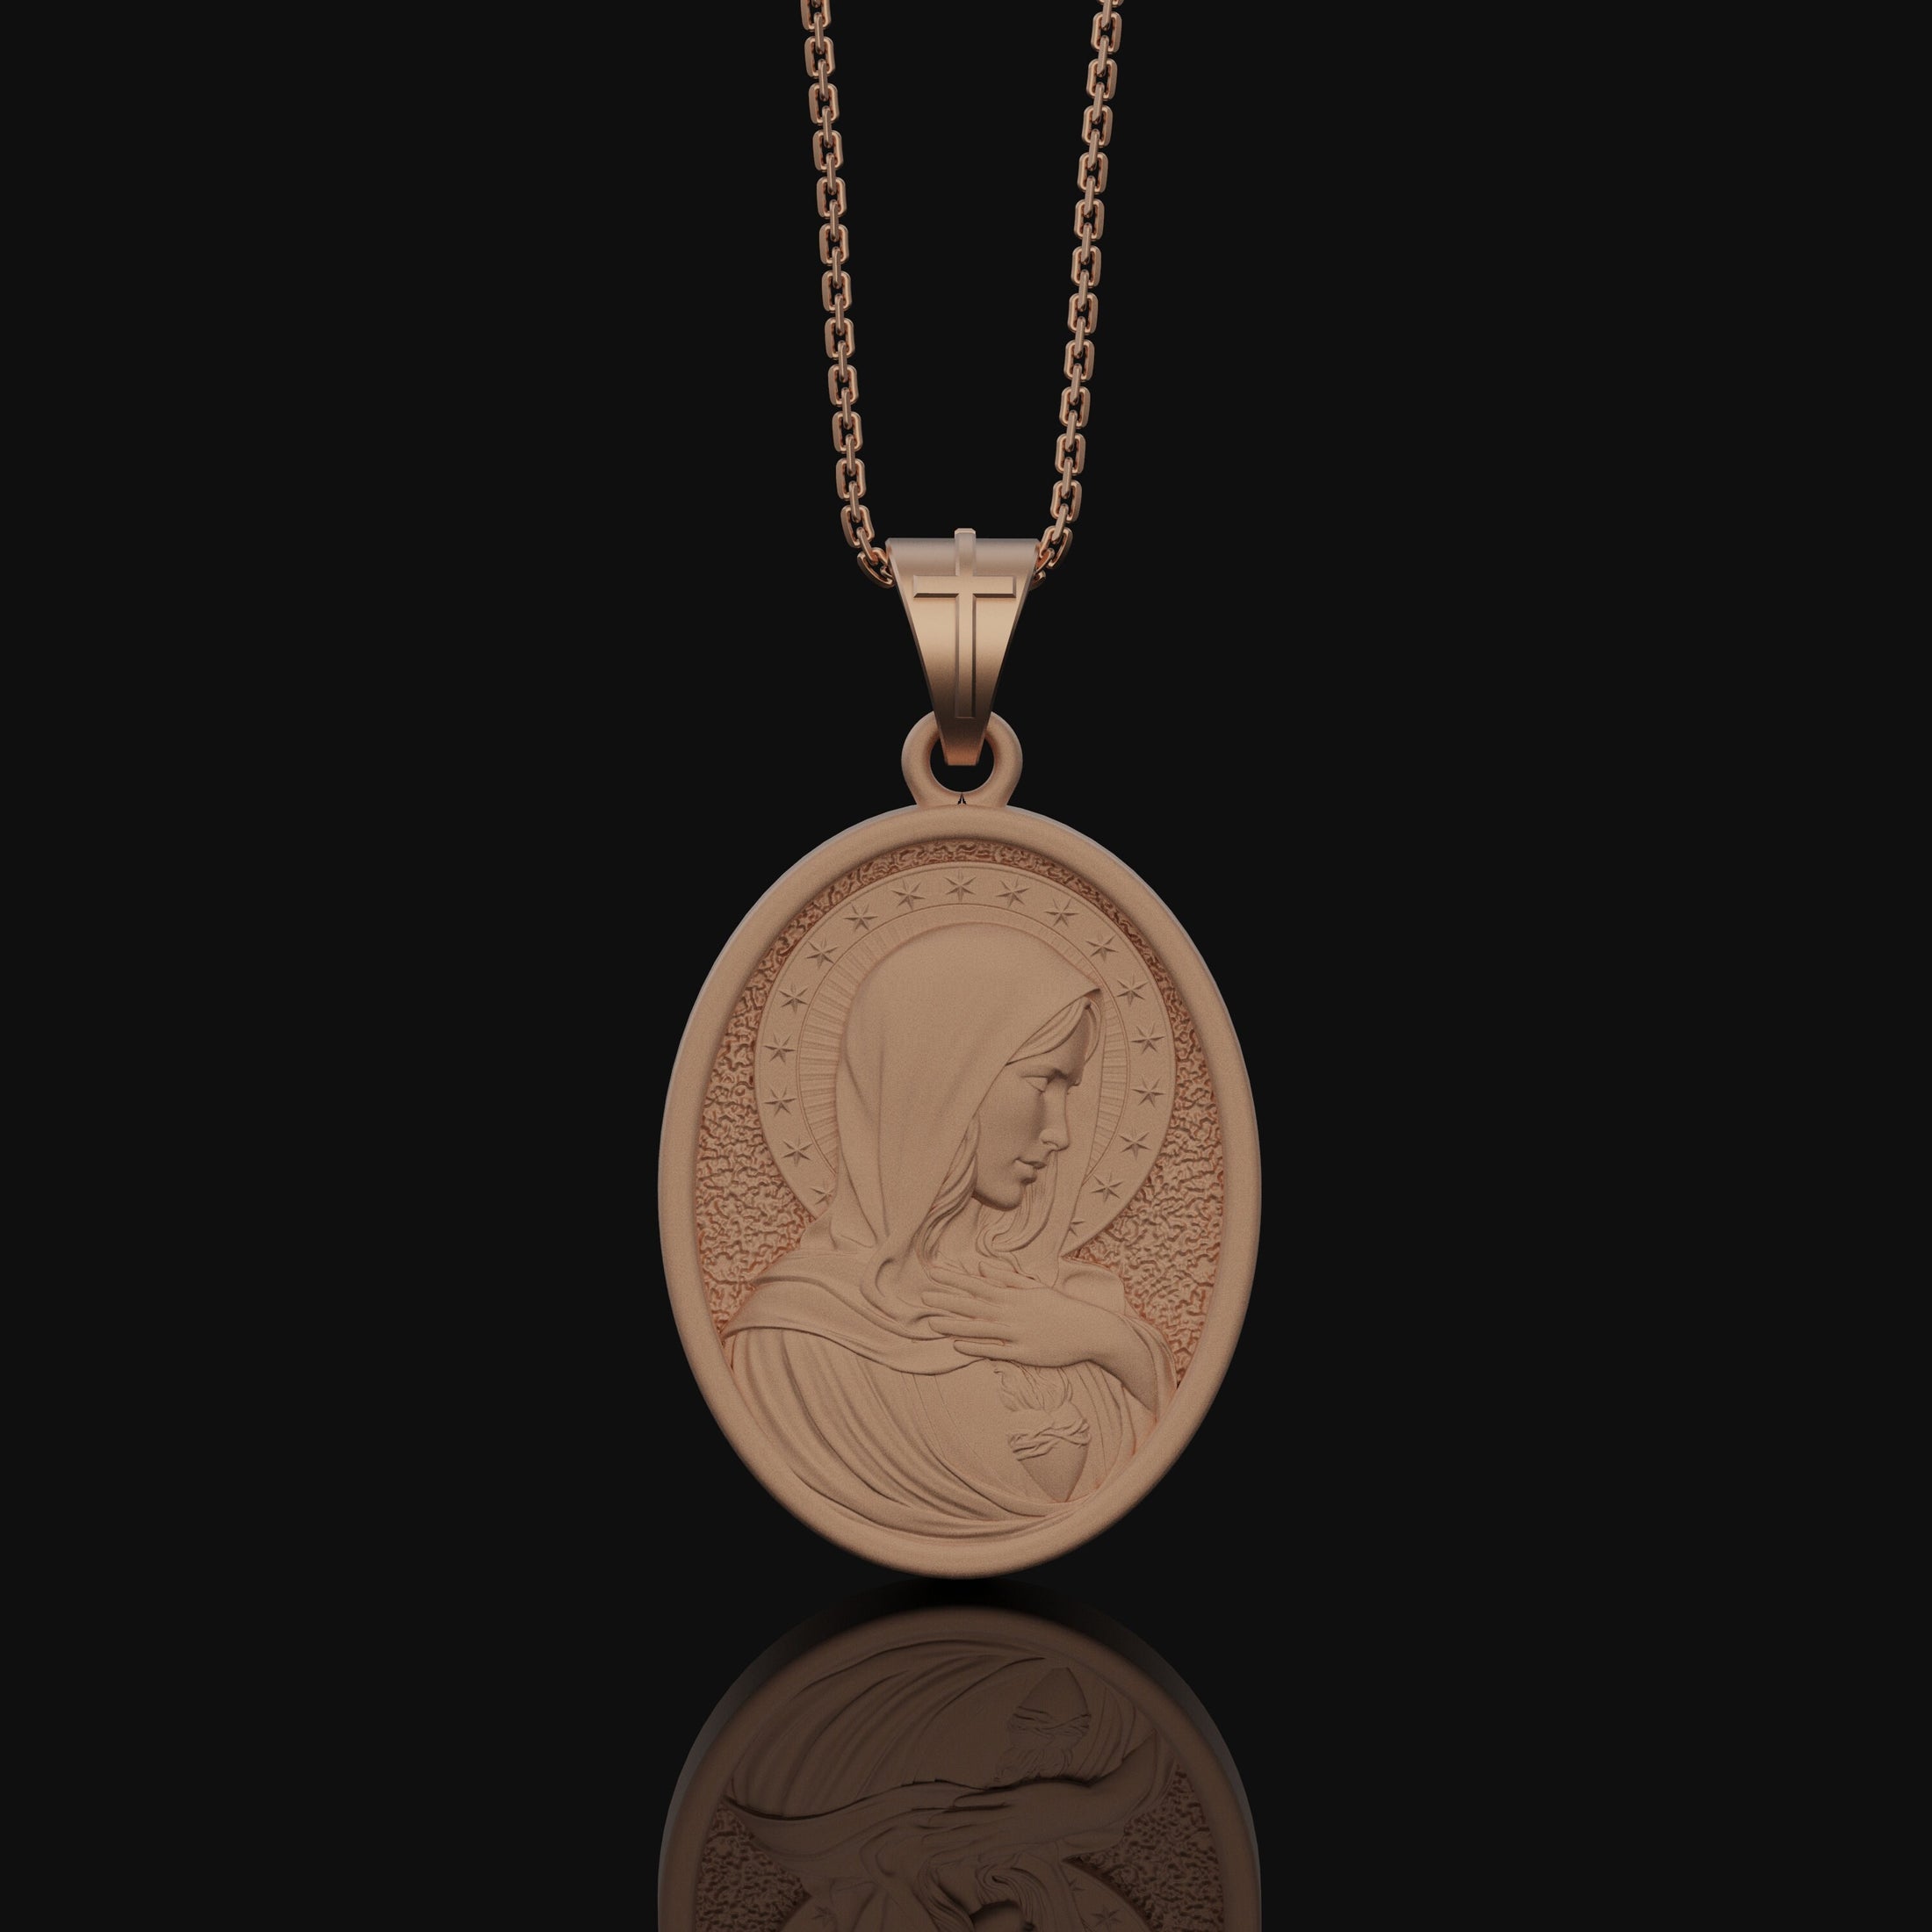 Immaculate Heart, Virgin Mary, Mother Of Jesus, Religious Jewelry, Sacred Heart Medal, Miraculous Medal, Religious Pendant Rose Gold Matte